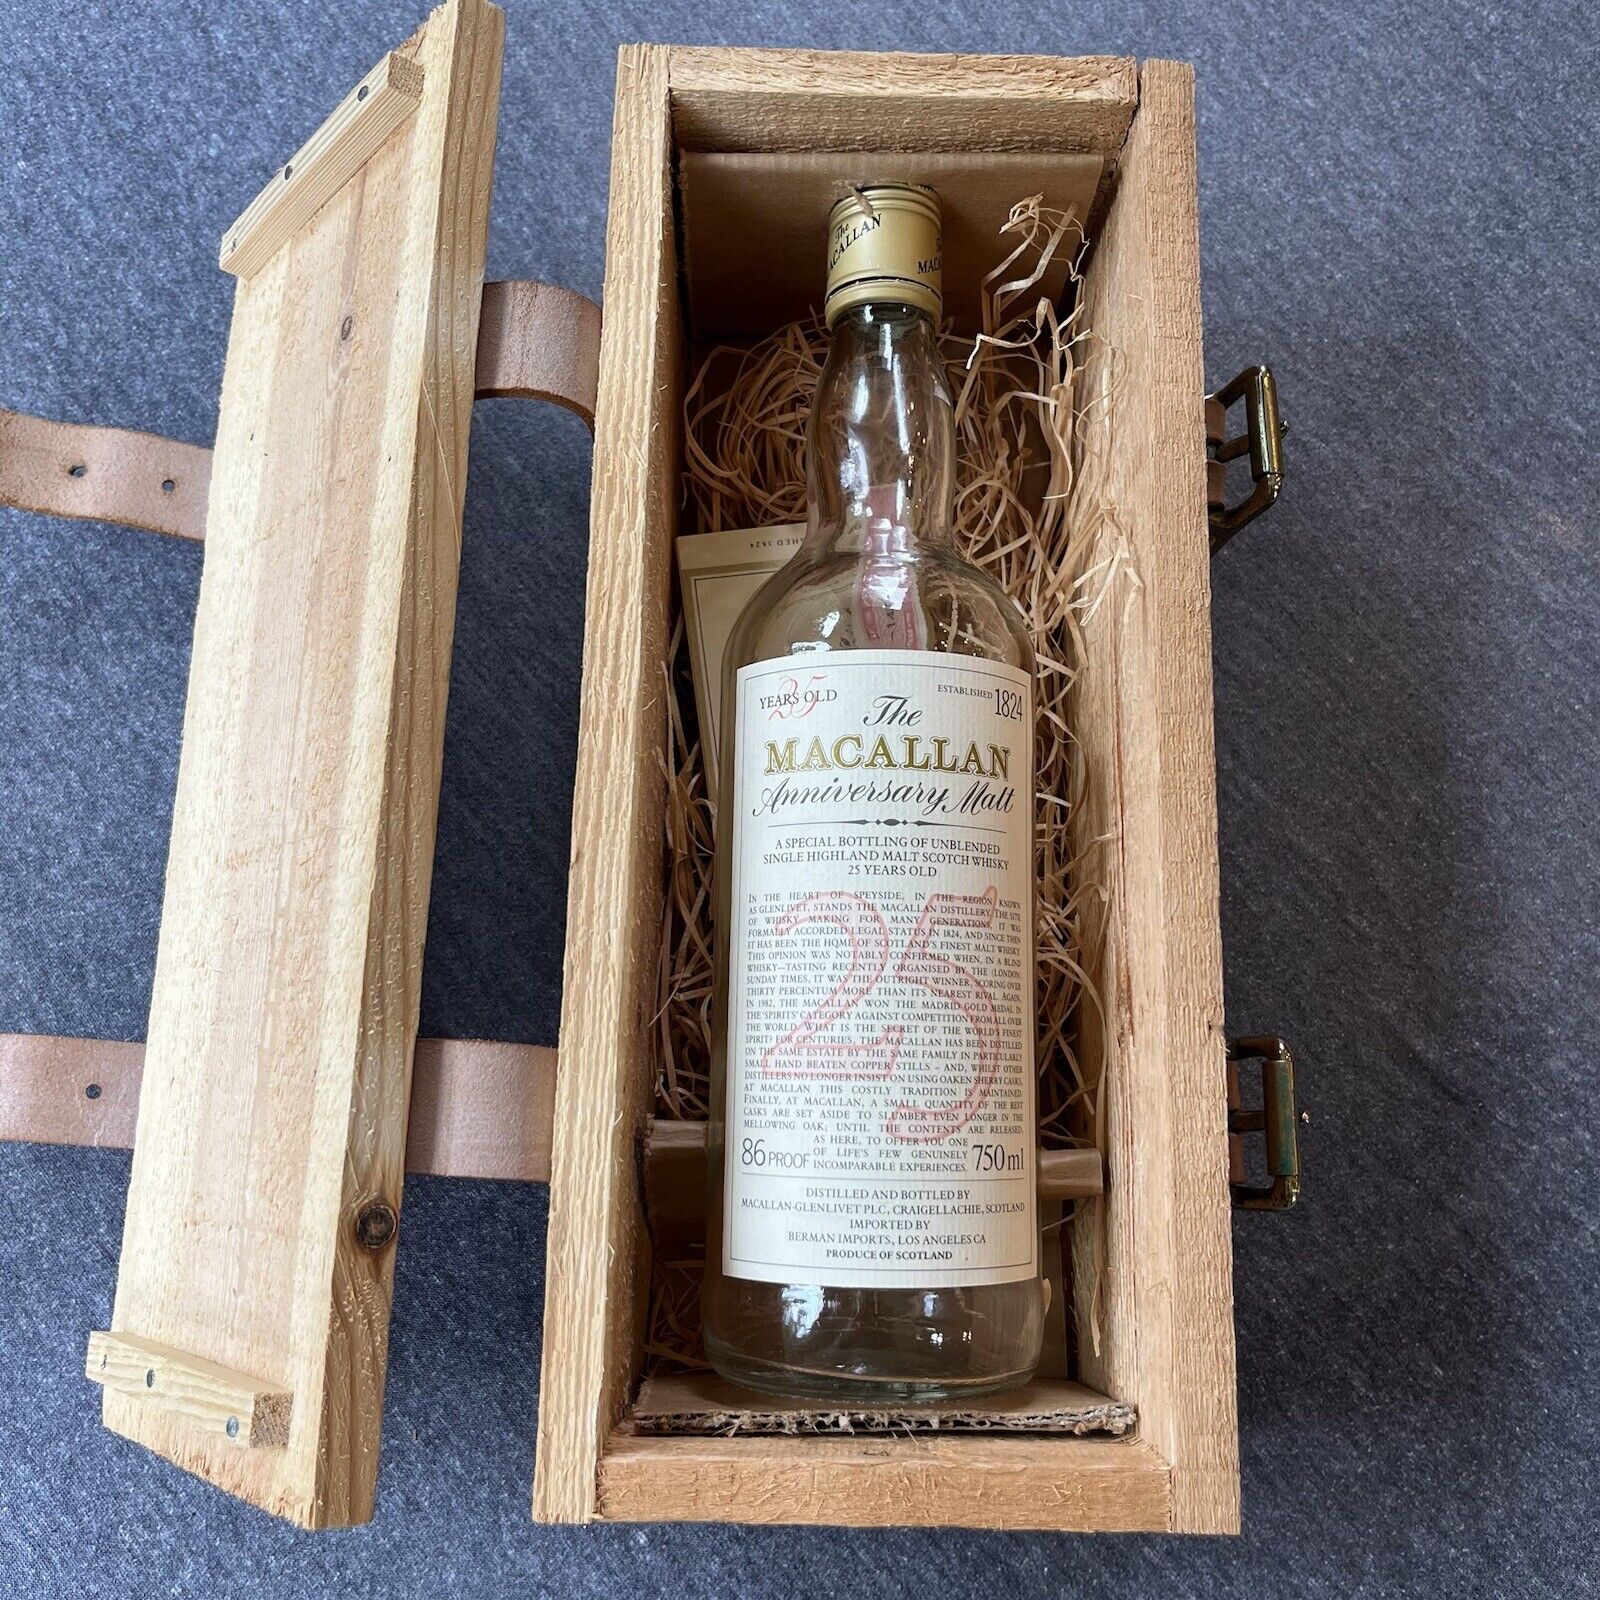 The Macallan Over 25 Years Old Anniversary Malt Leather Strap Box & Bottle 1980s